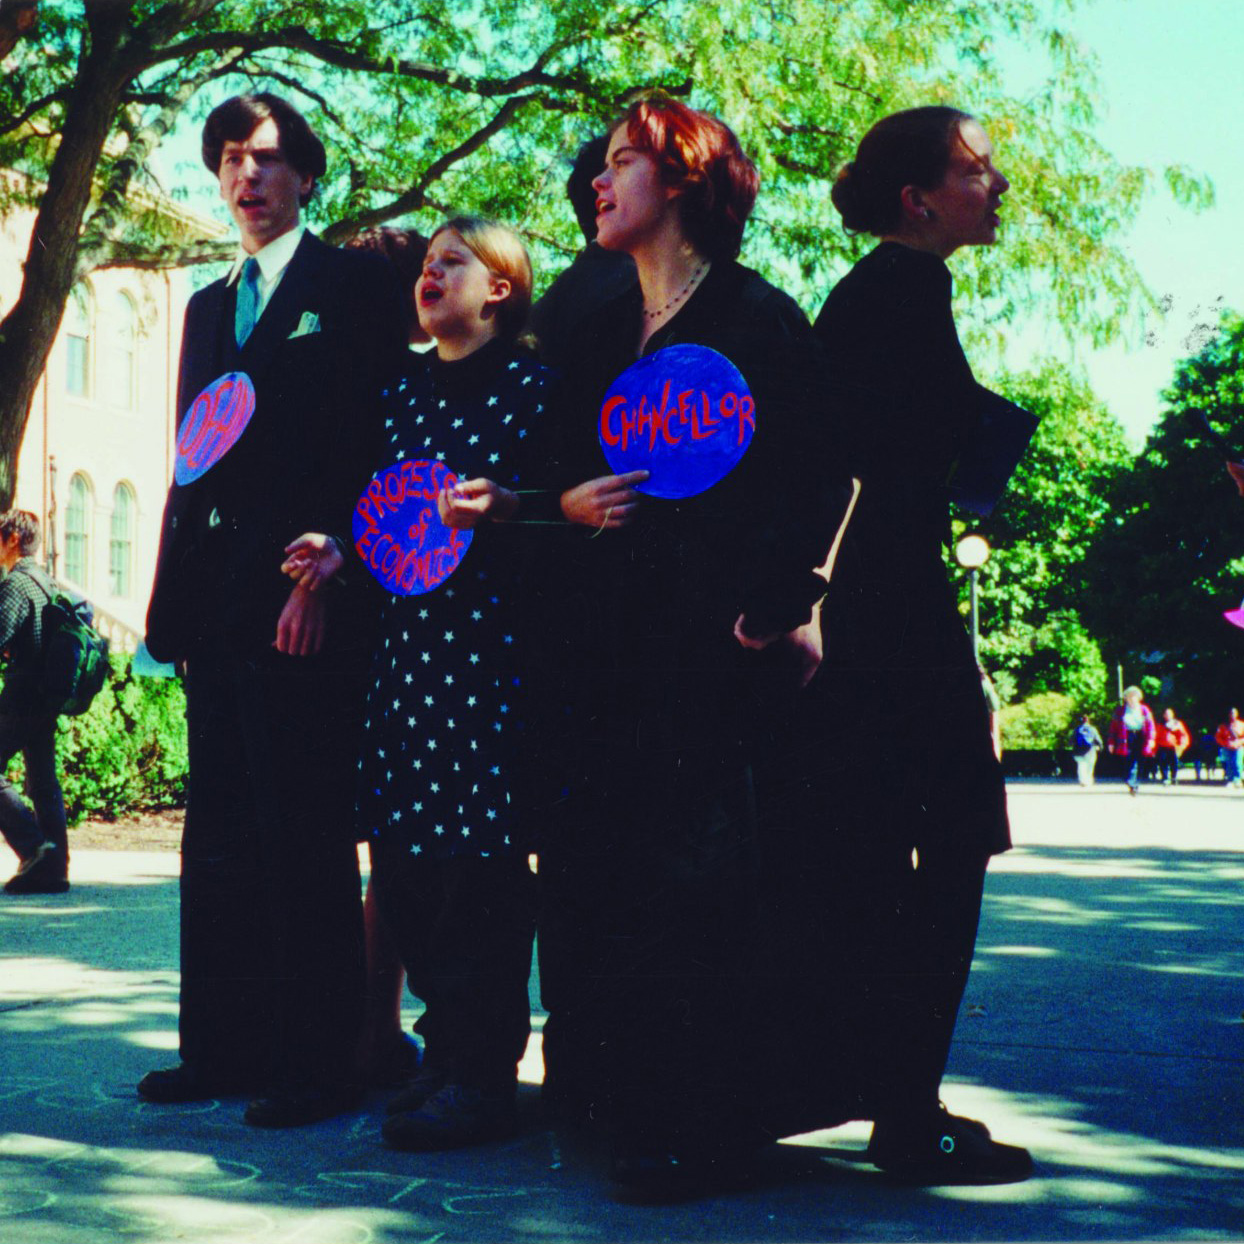 Five people dressed in black clothing with hand-painted labels describing positions in a university stand in a circle during a street theater performance.